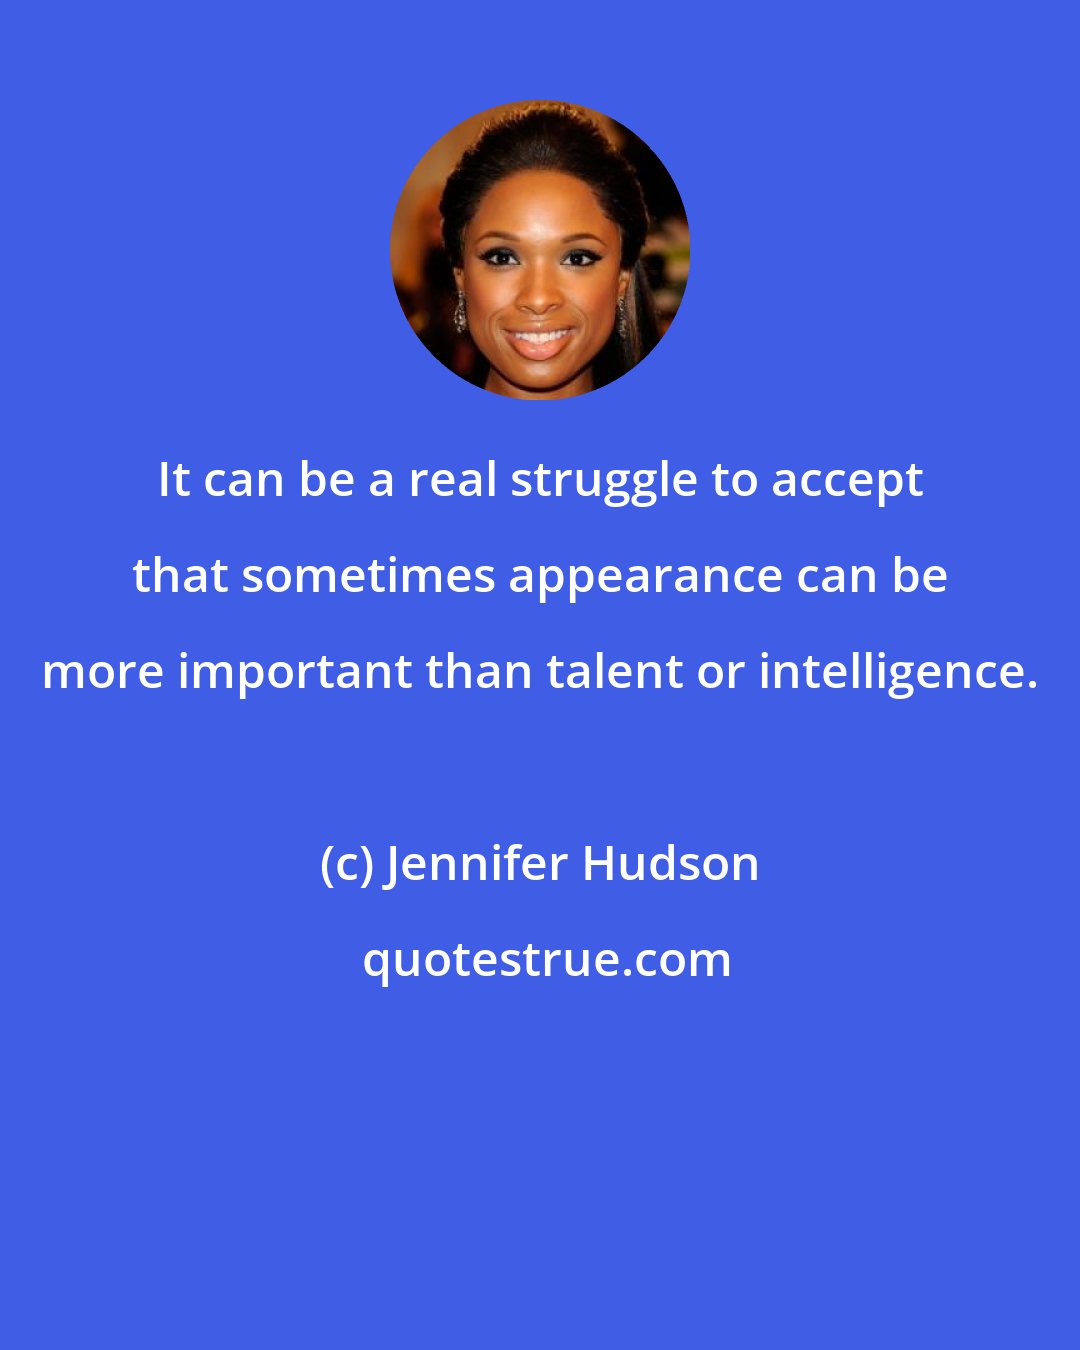 Jennifer Hudson: It can be a real struggle to accept that sometimes appearance can be more important than talent or intelligence.